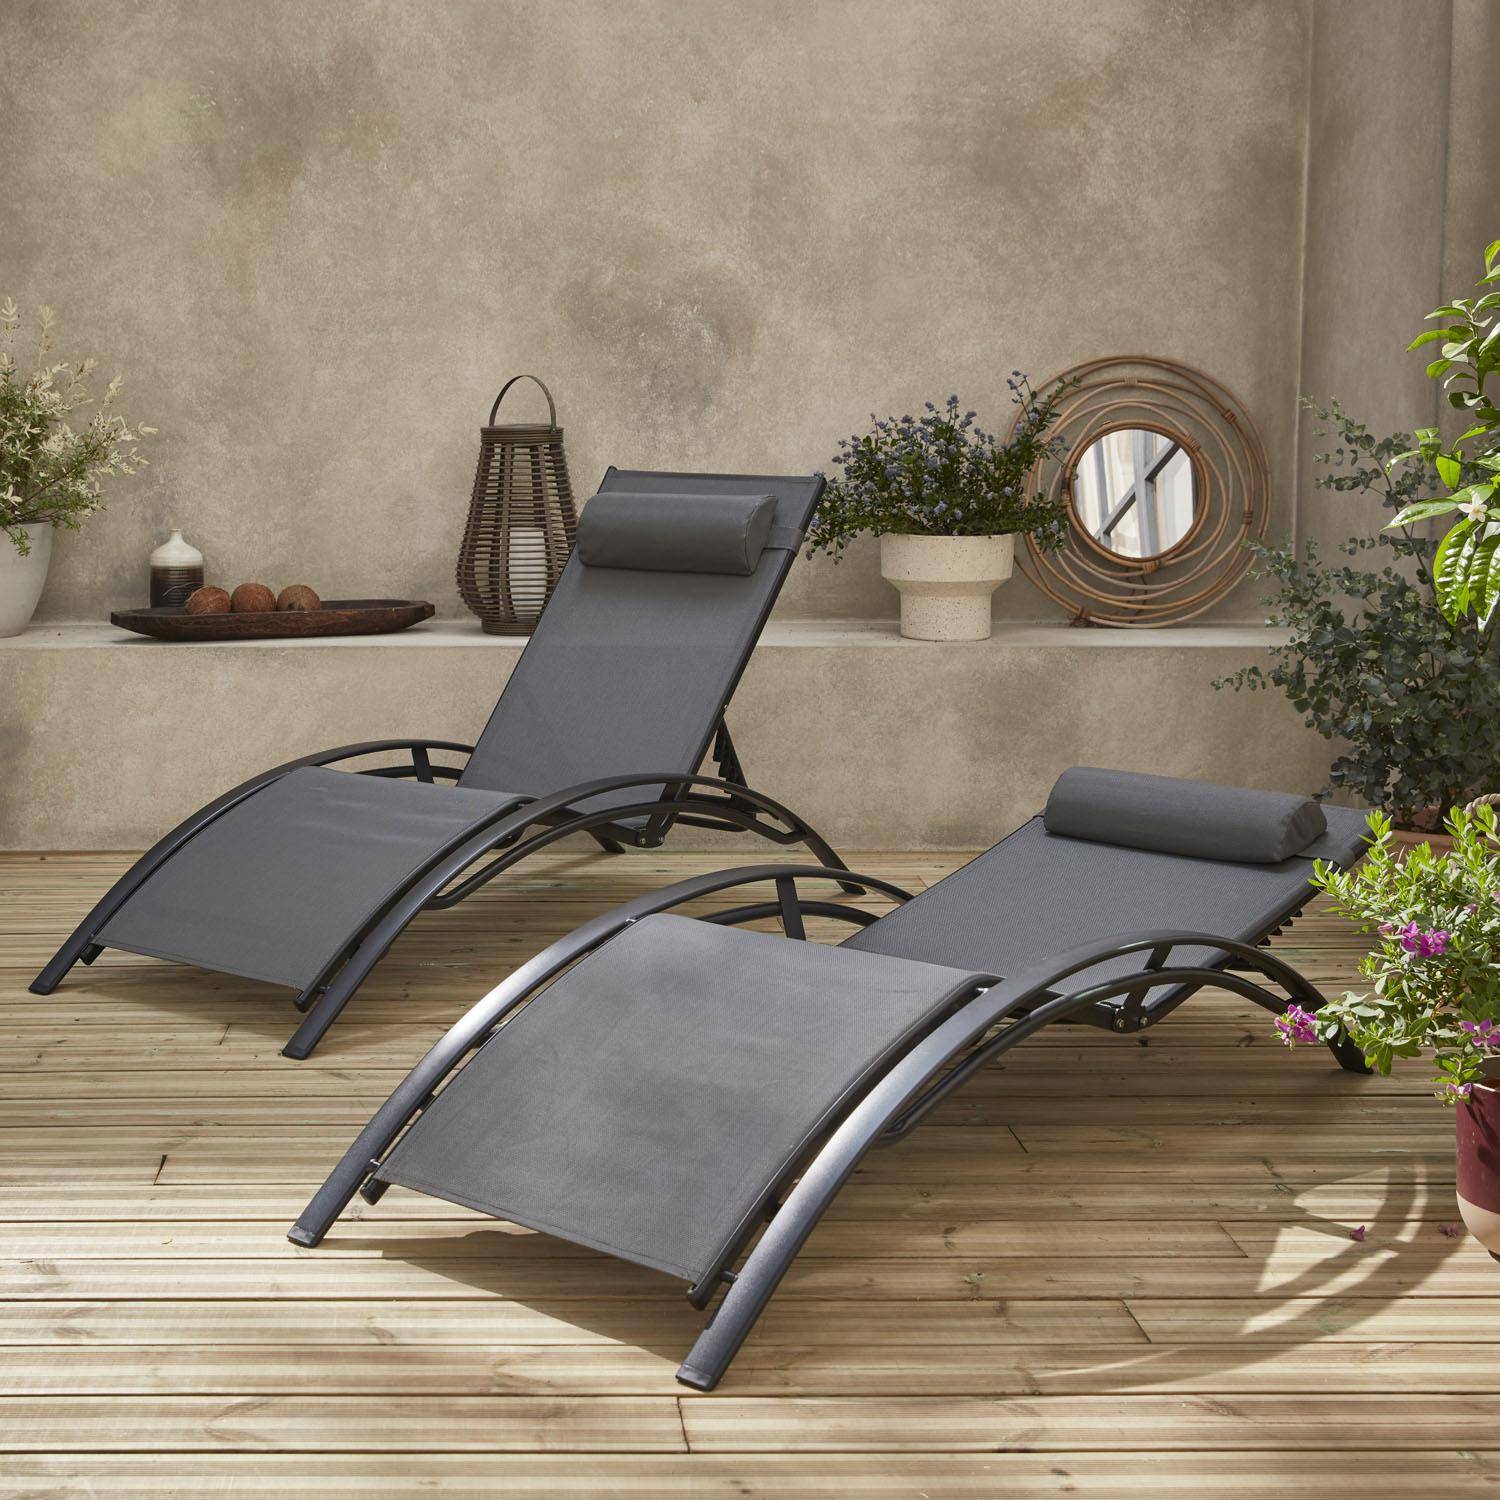 Pair of aluminium and textilene sun loungers, 4 reclining positions, headrest included, stackable - Louisa - Anthracite frame, Grey textilene Photo2